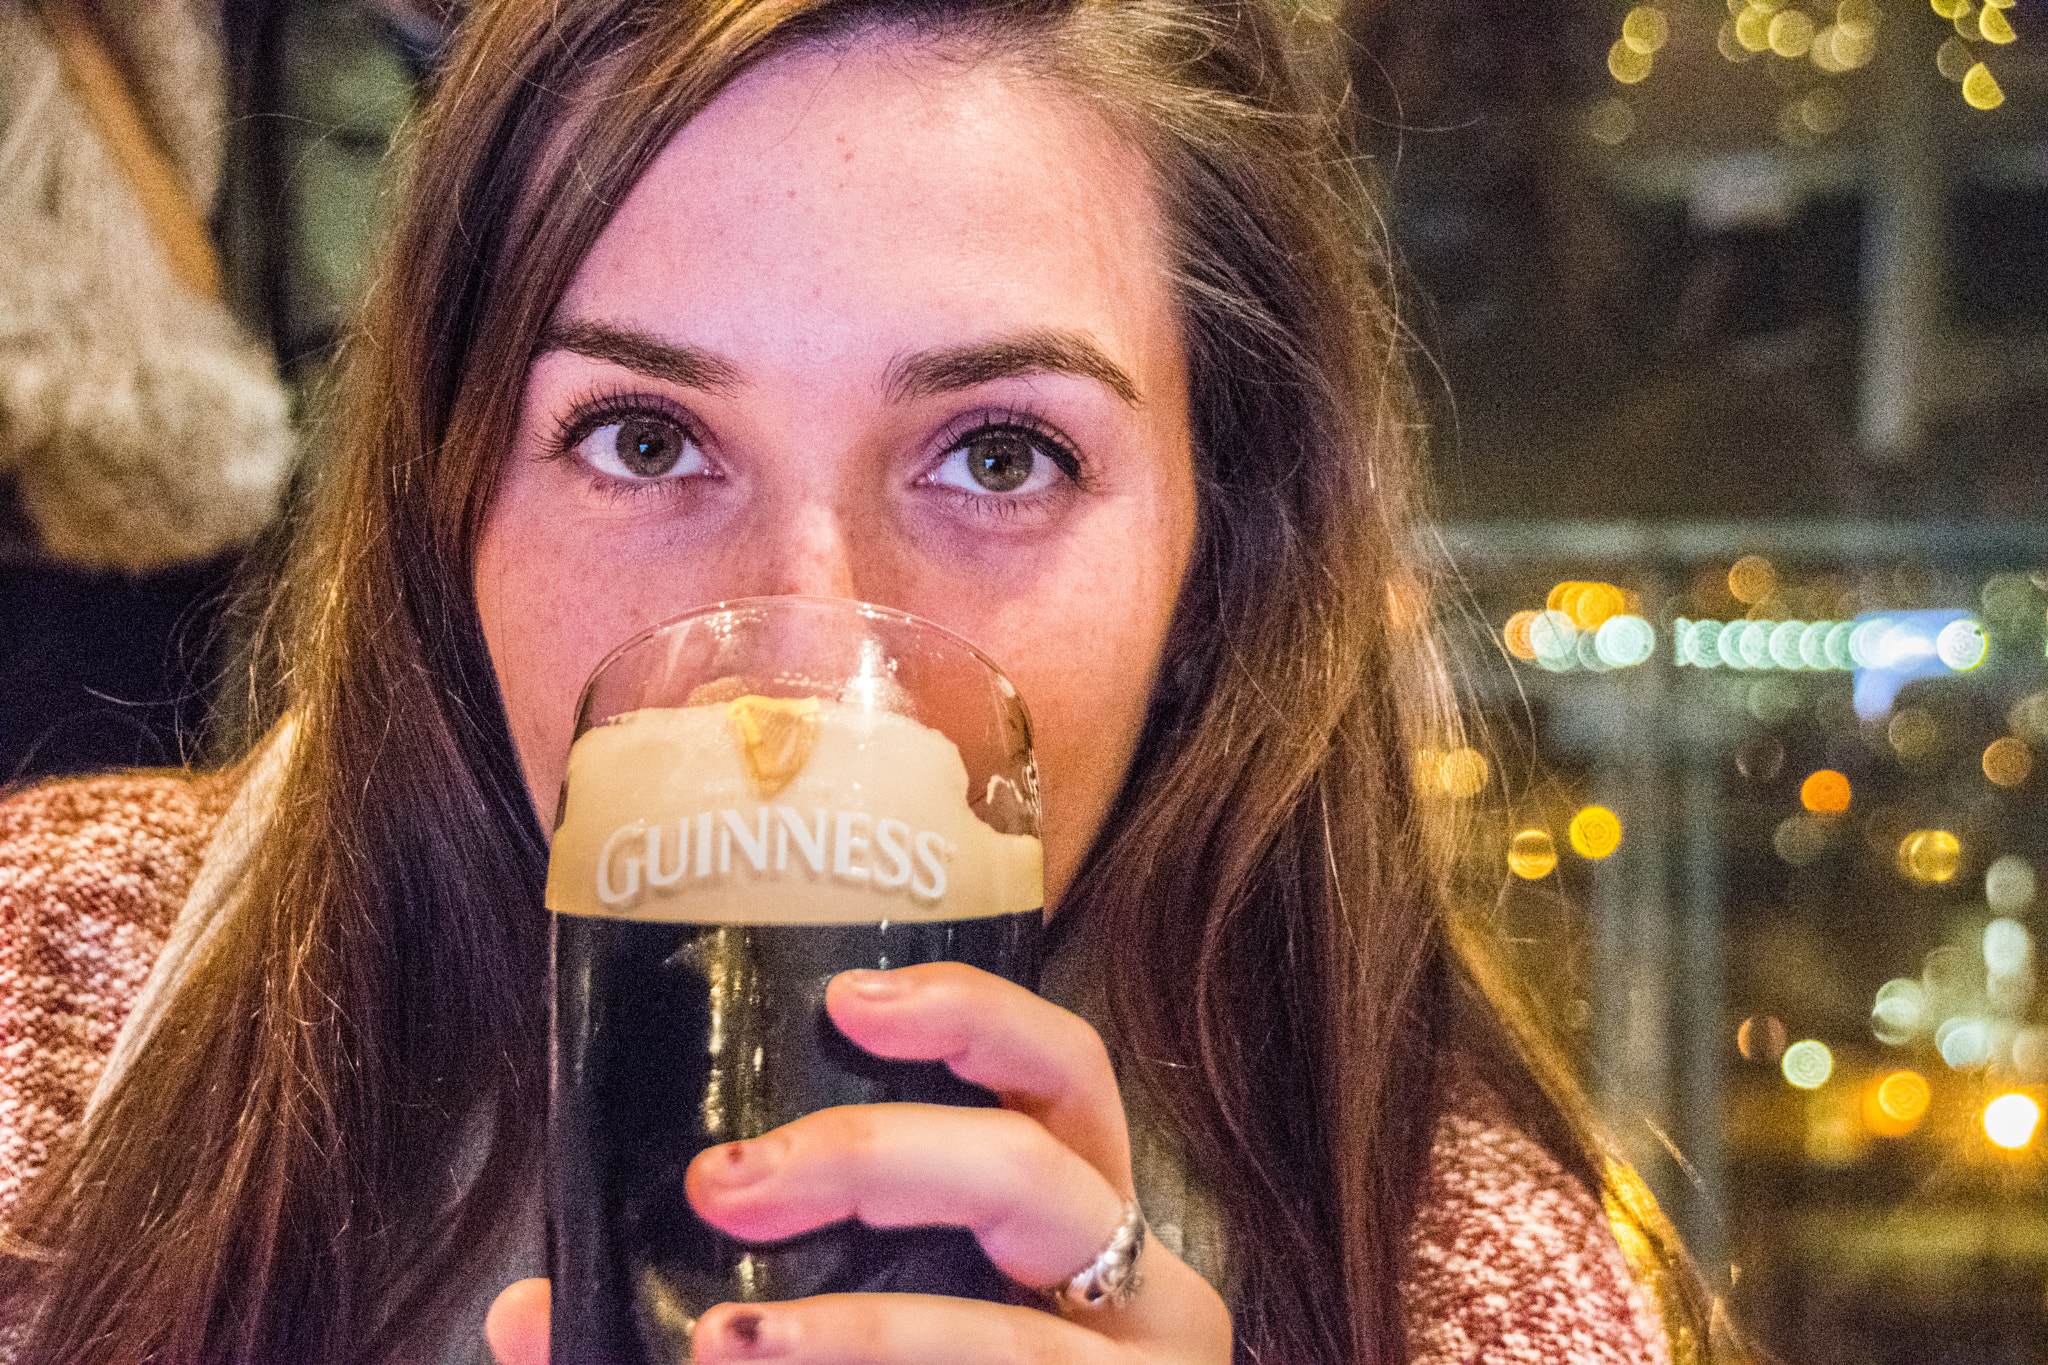 Nikon D5500 sample photo. Guiness is good for you photography